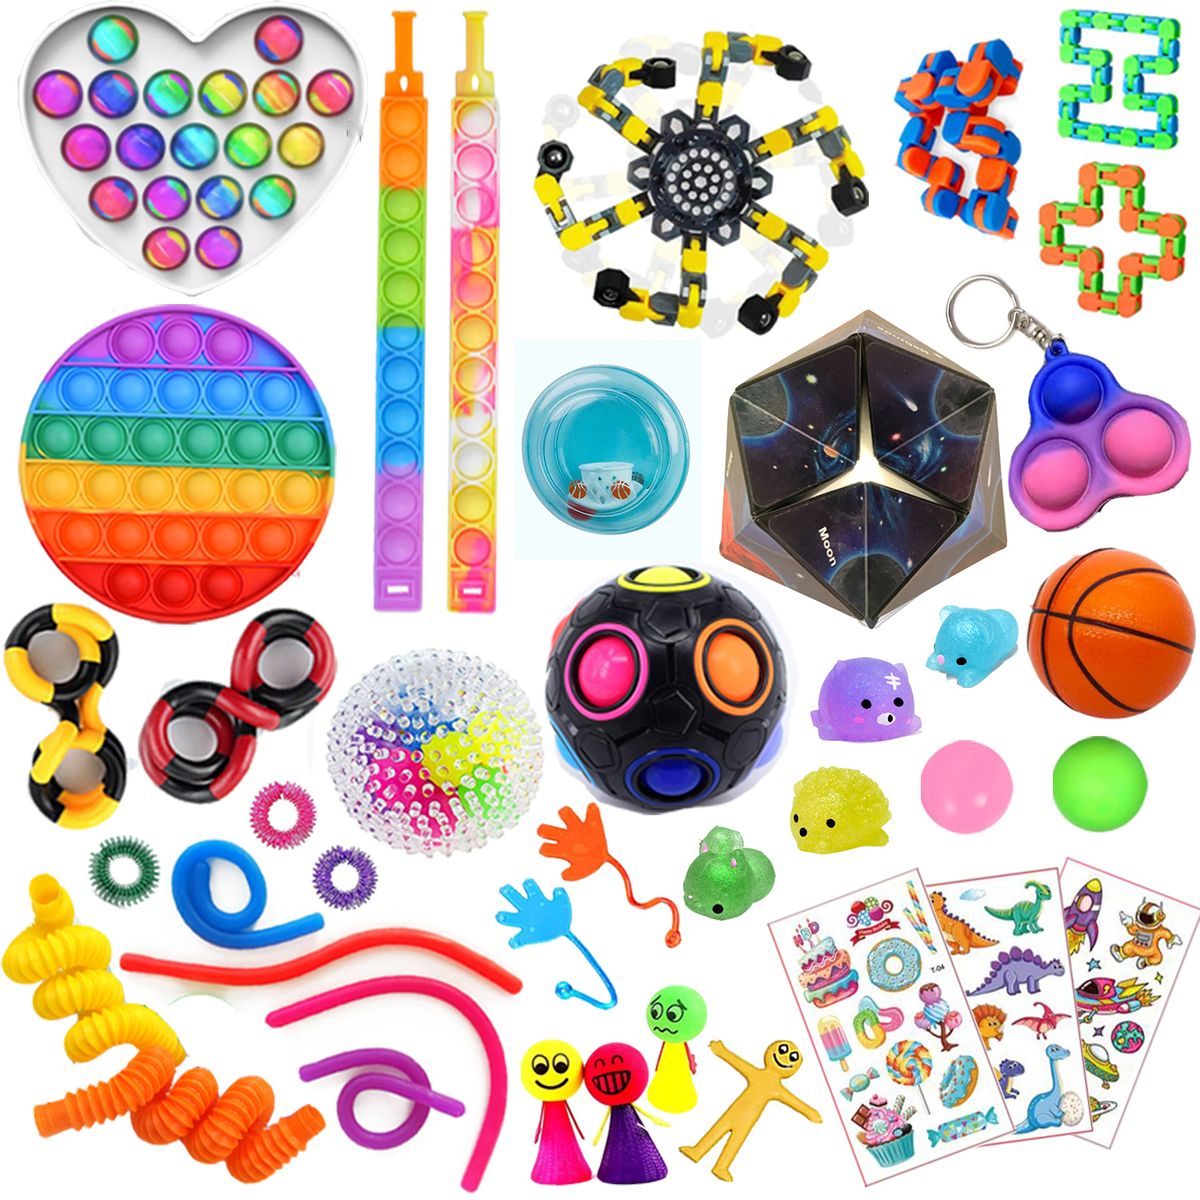 Fidget Toys: What Are They and How Can They Help Children and Adults?